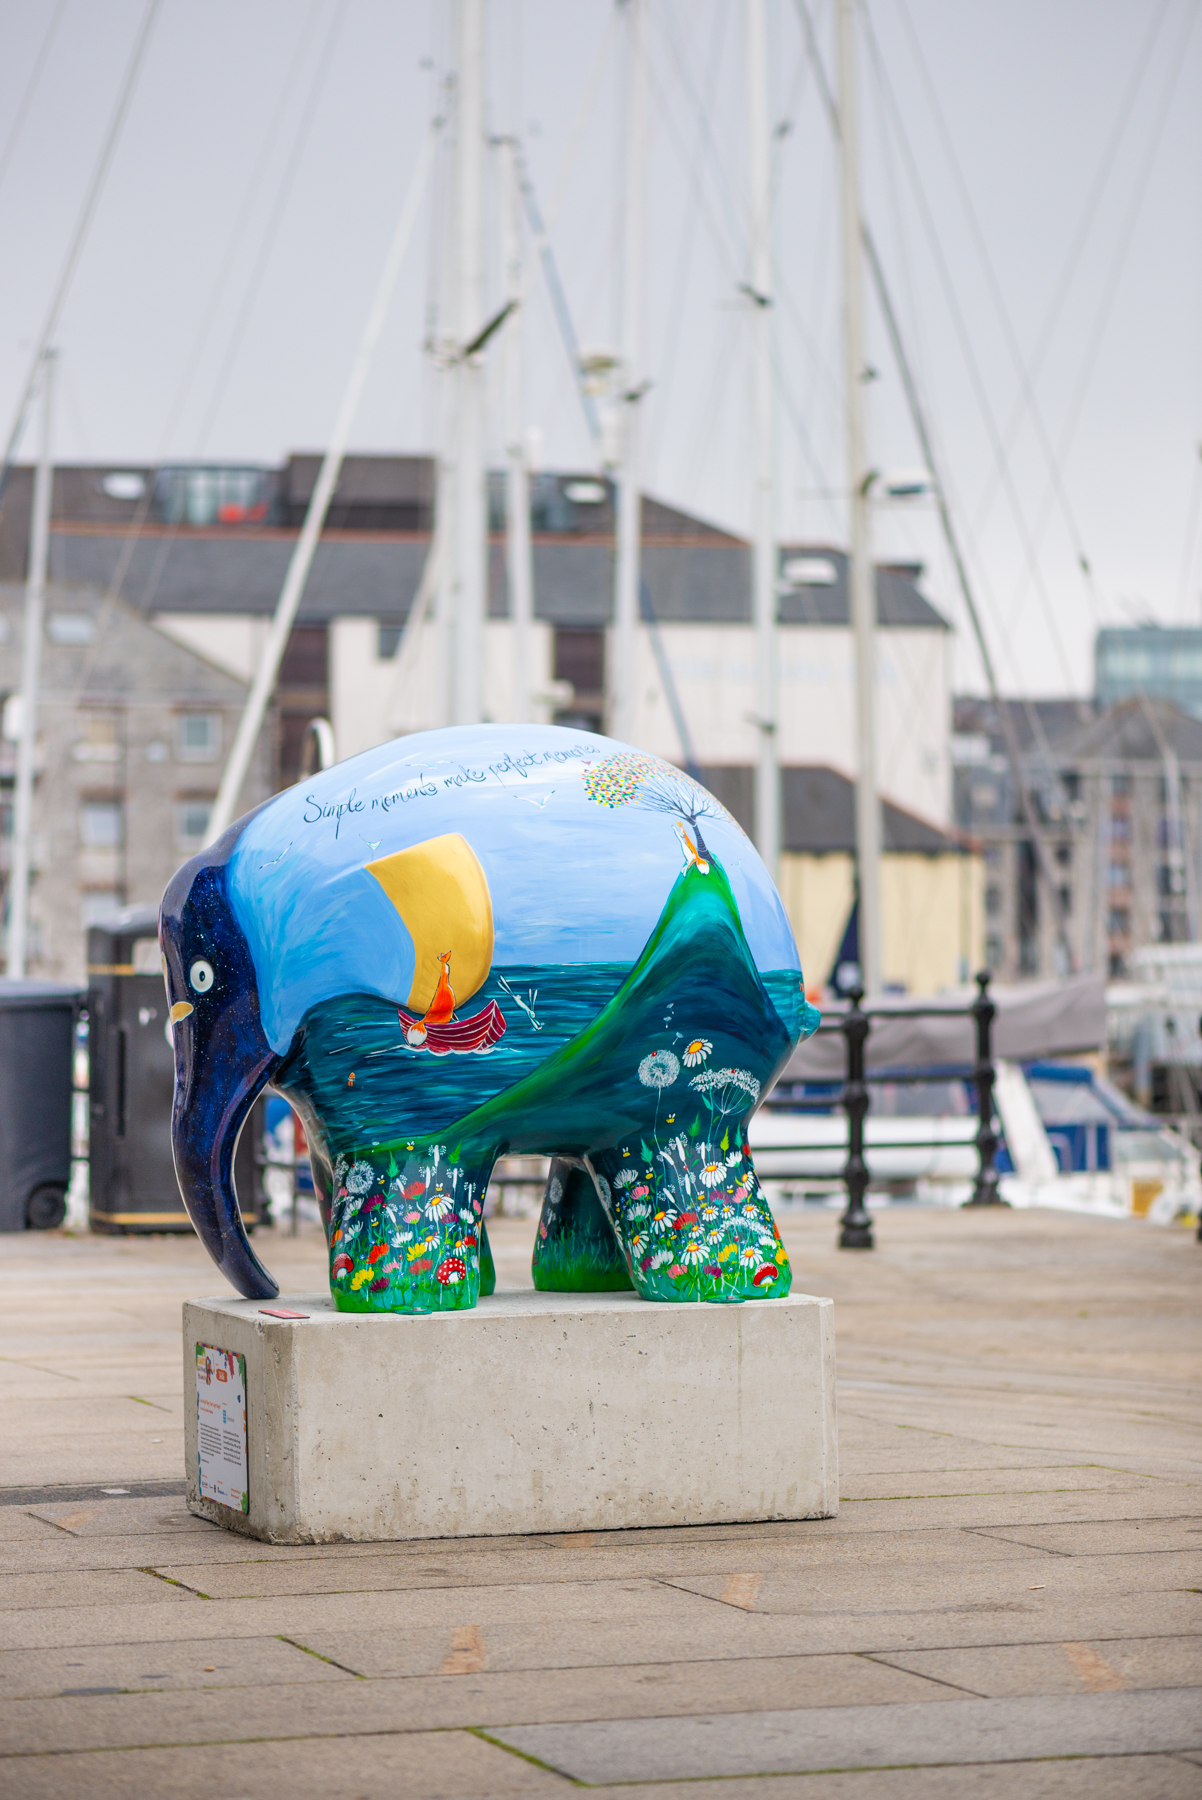 'Zou' by Jess Perrin. Sponsored by Foot Anstey - Image 10 of 16